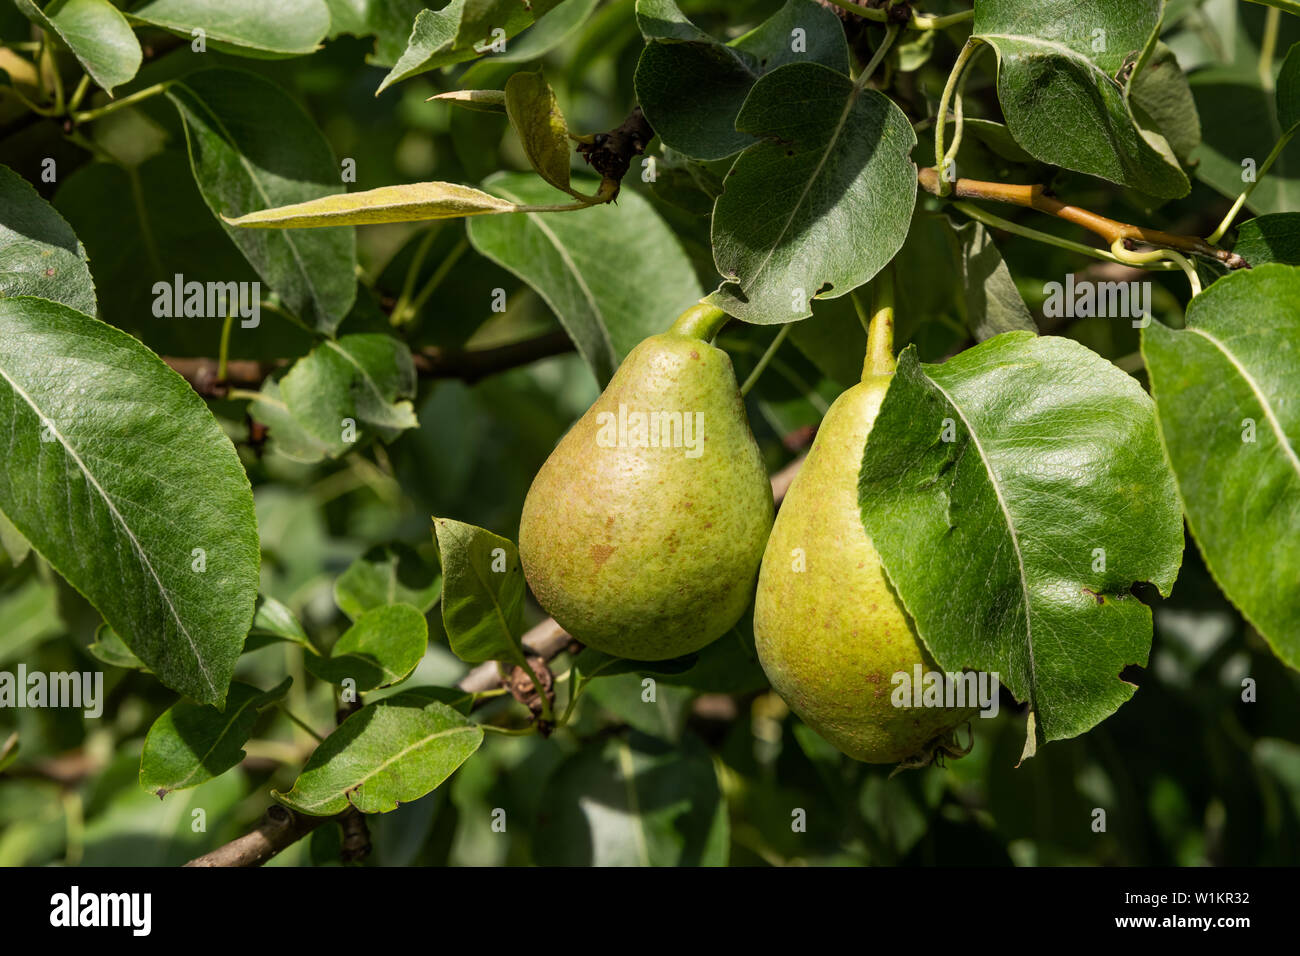 Description: Green pears with the green background. Stock Photo